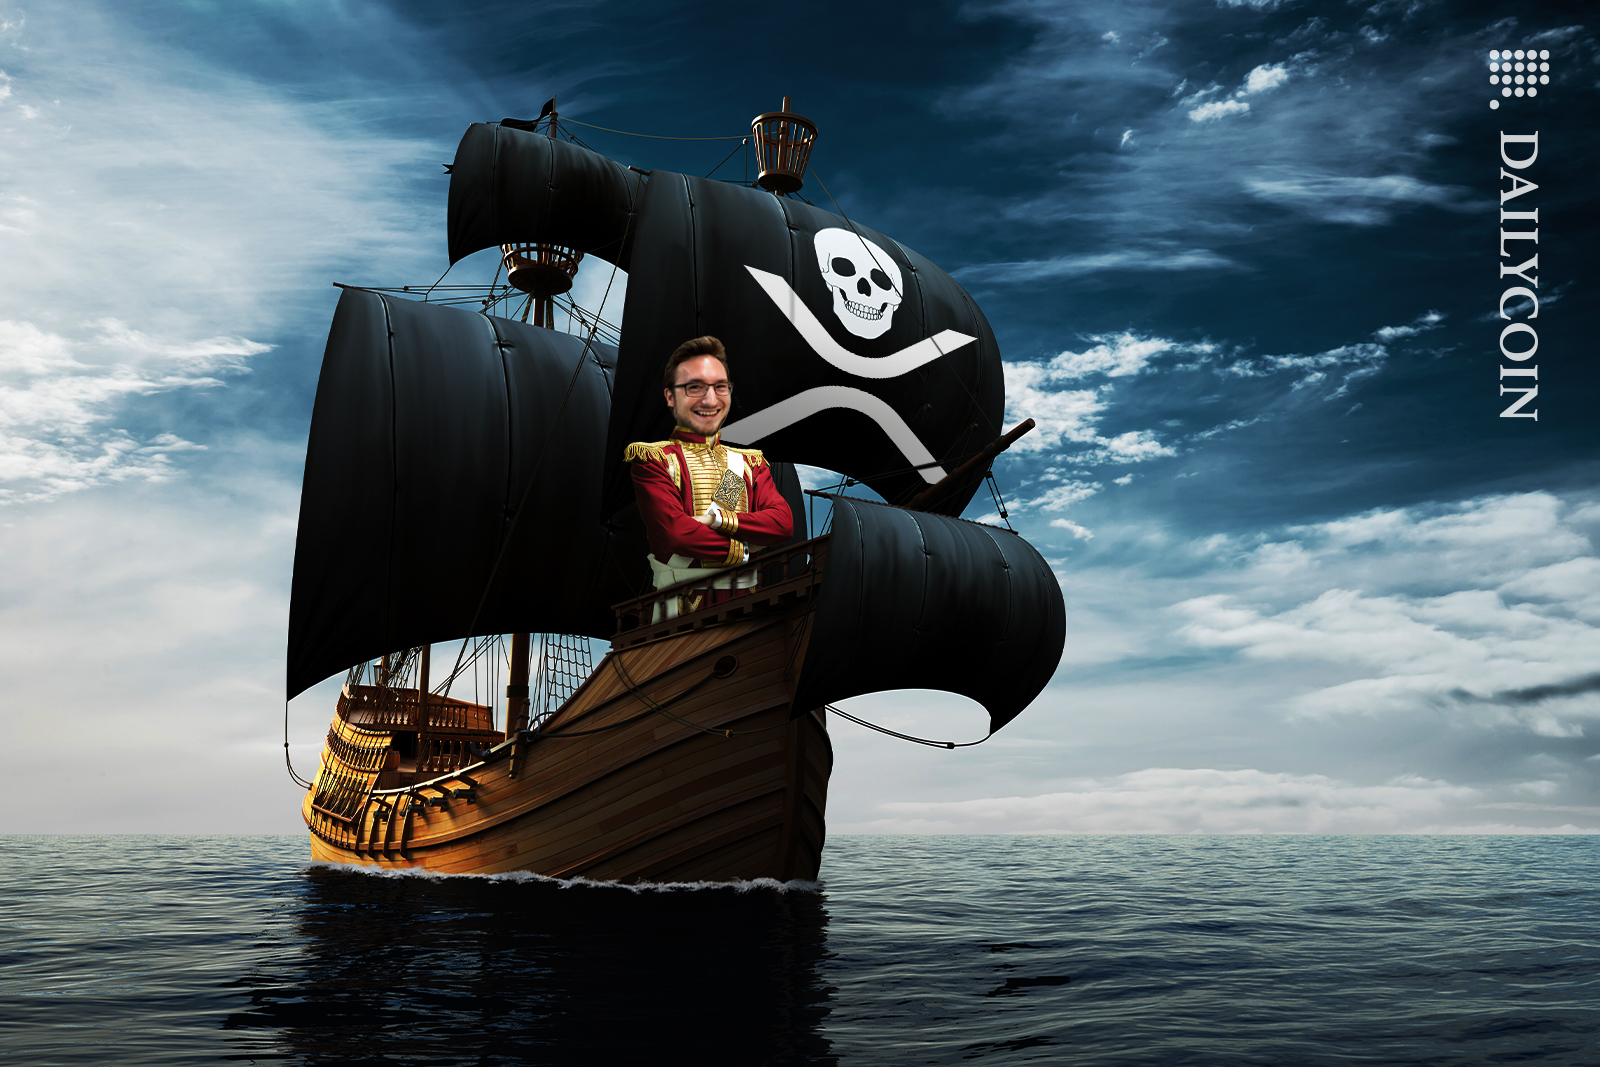 Wietse Wind swimming on a XRP pirate ship smiling.